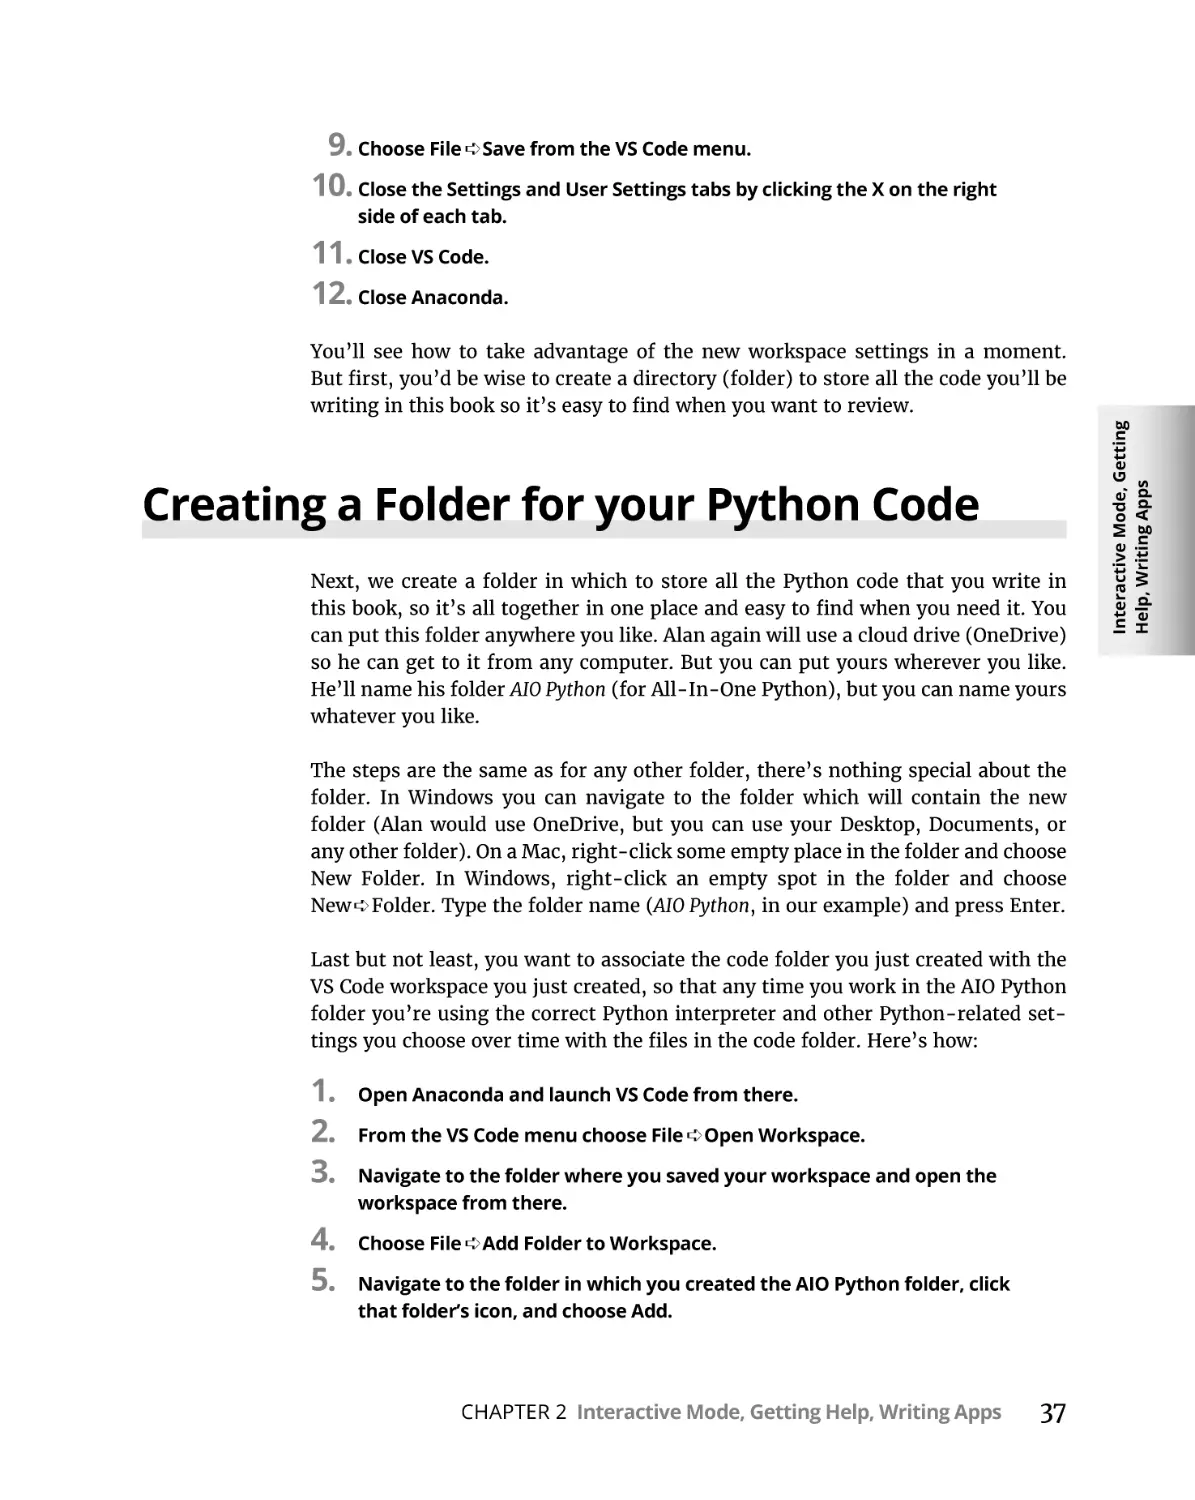 Creating a Folder for your Python Code